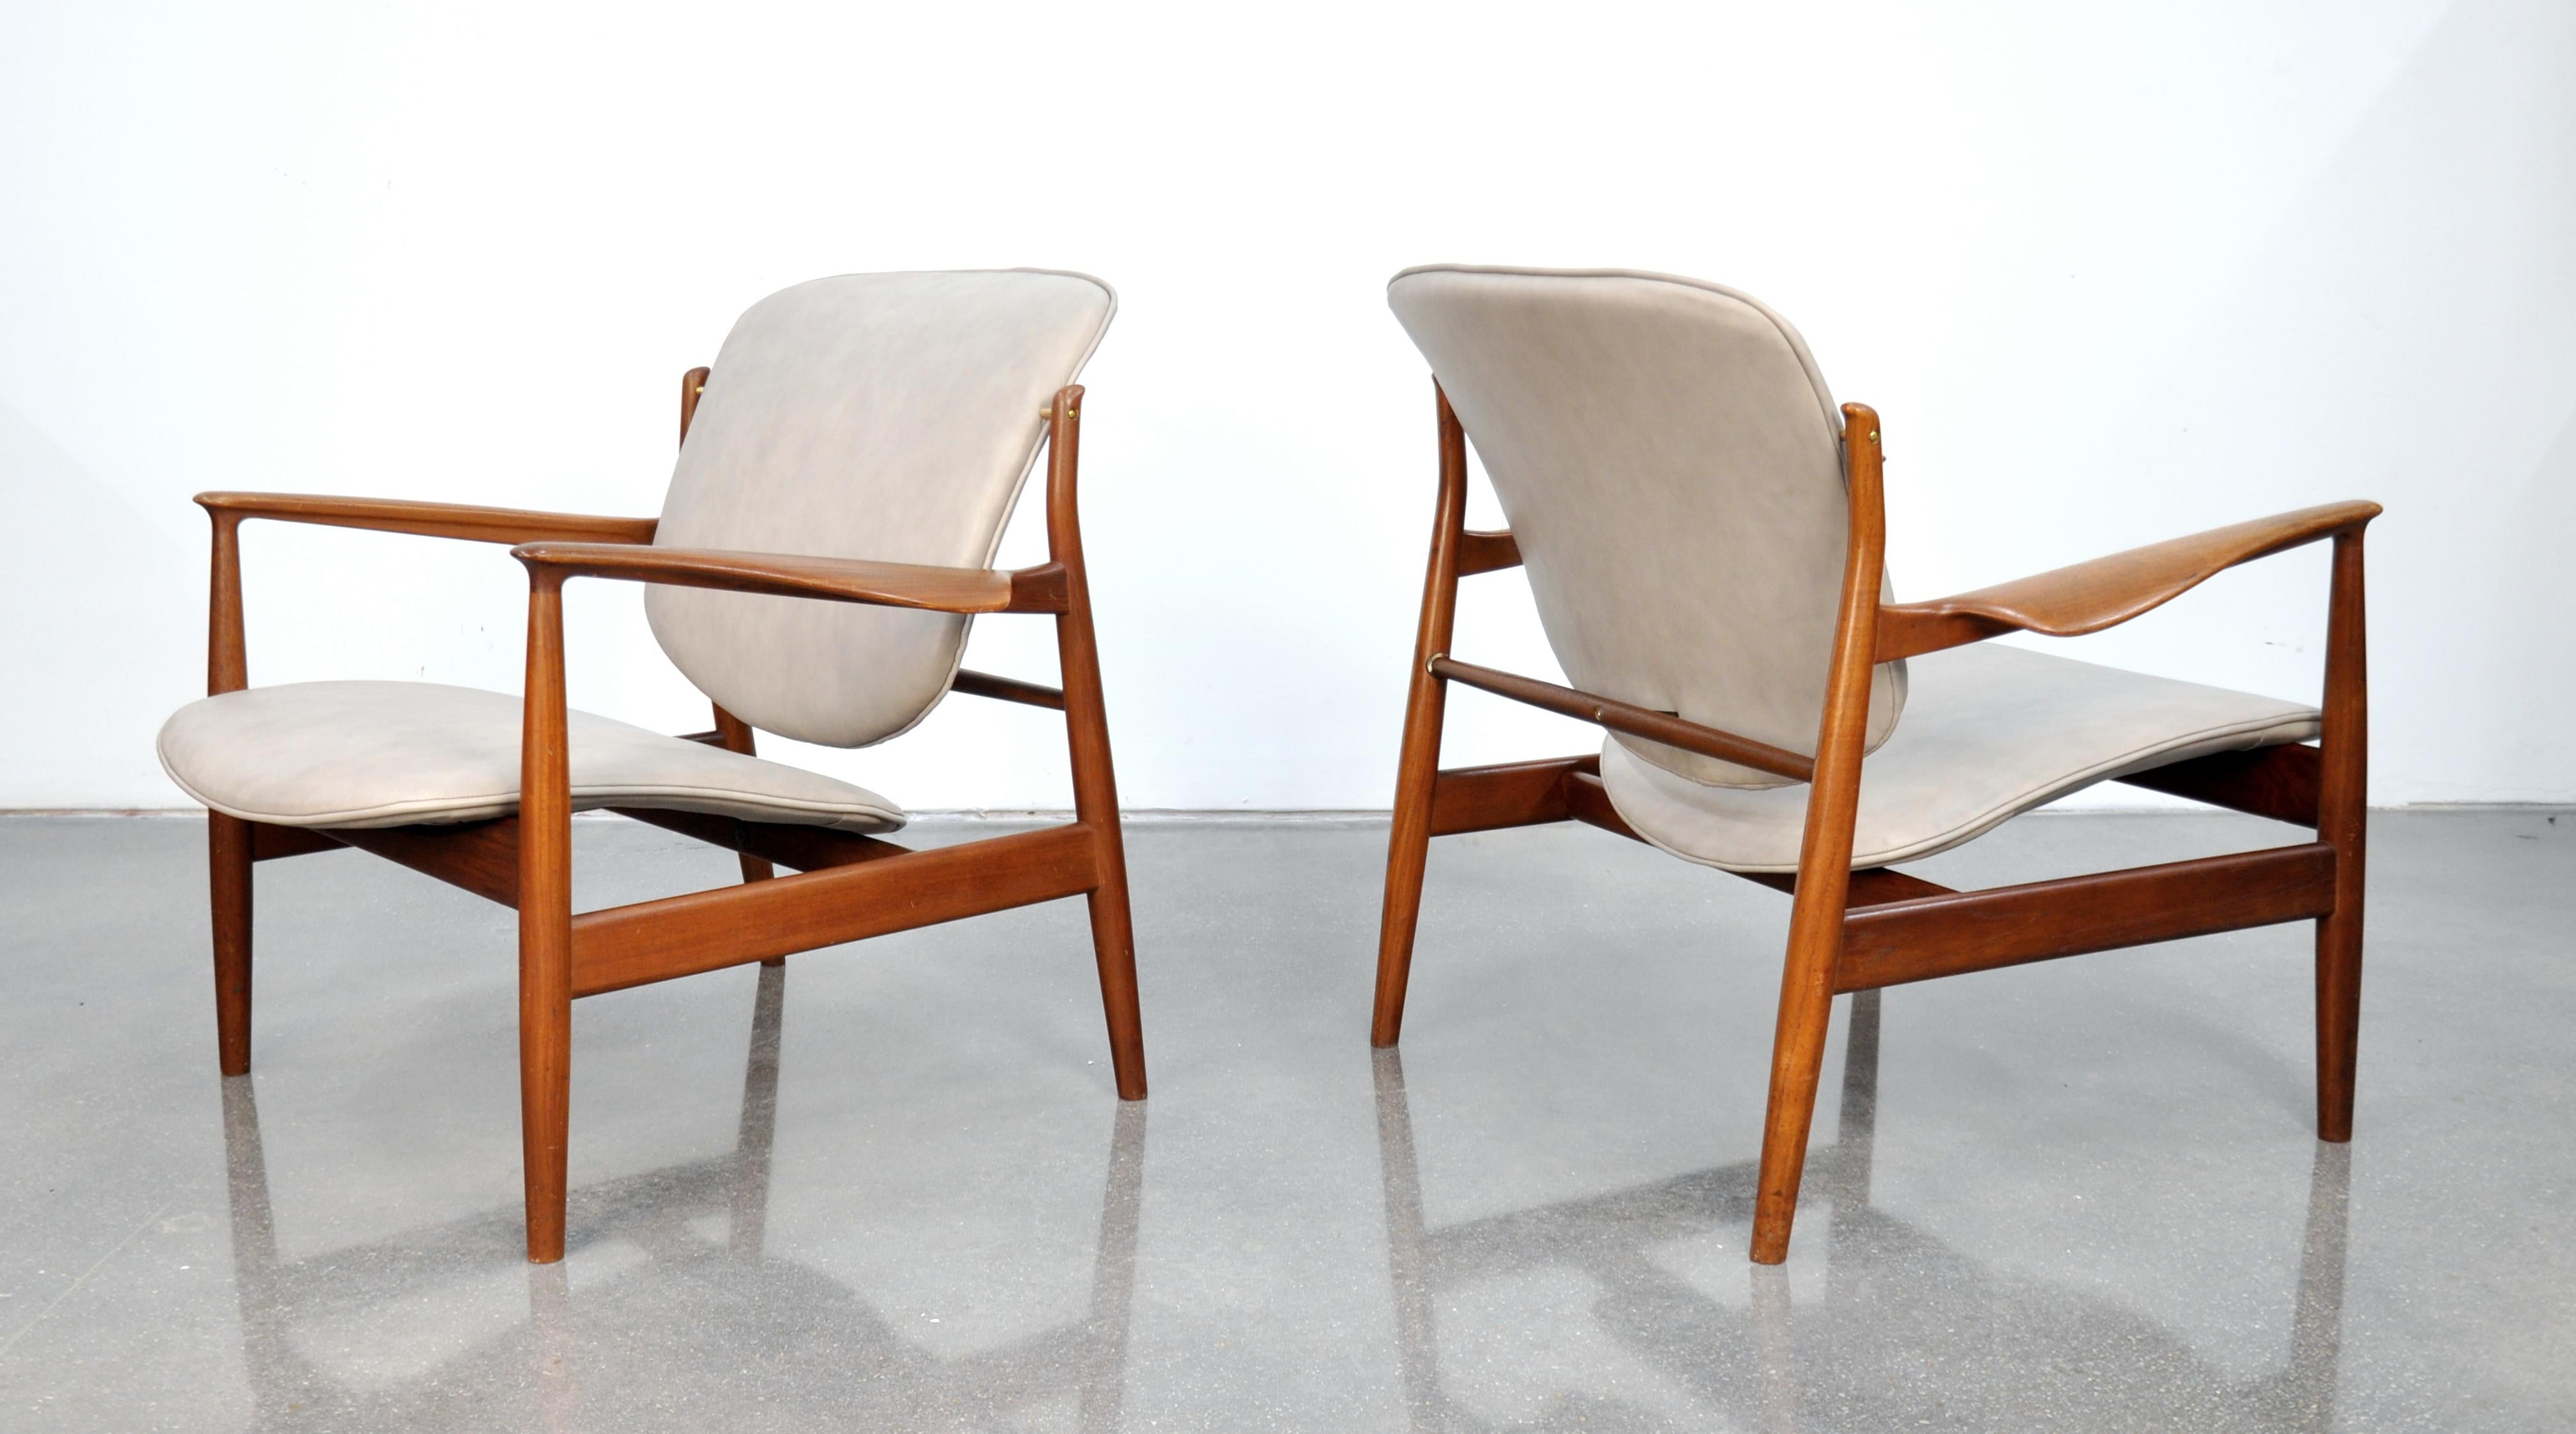 Pair of the iconic midcentury Danish modern easy chairs designed by Finn Juhl for France and Daverkosen (later named France and Son) in the 1950s. The splendidly sculpted teak frames are in original condition with amazing patina. The seats and